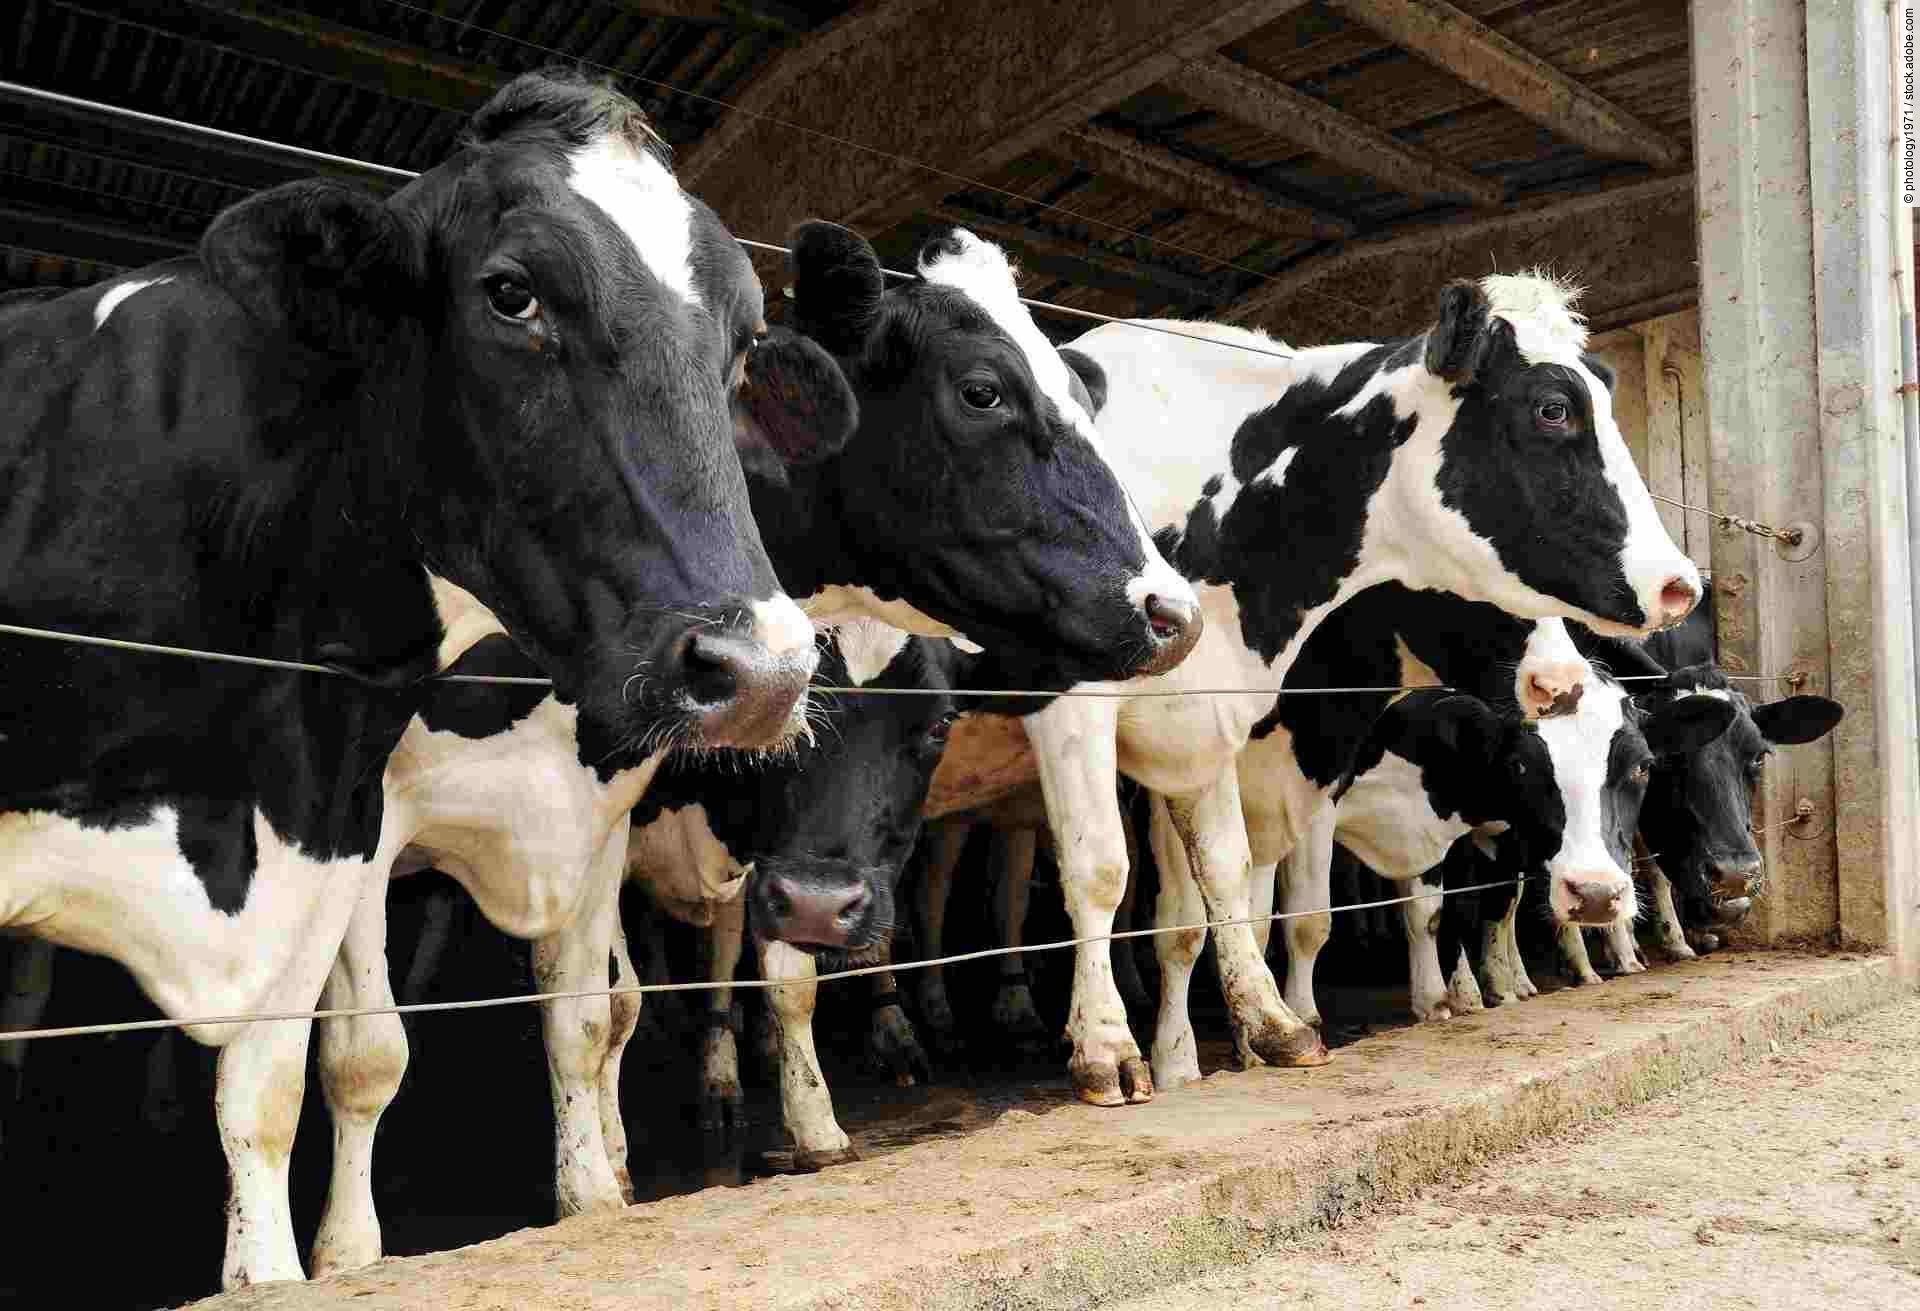 Row of dairy cows penned in a barn